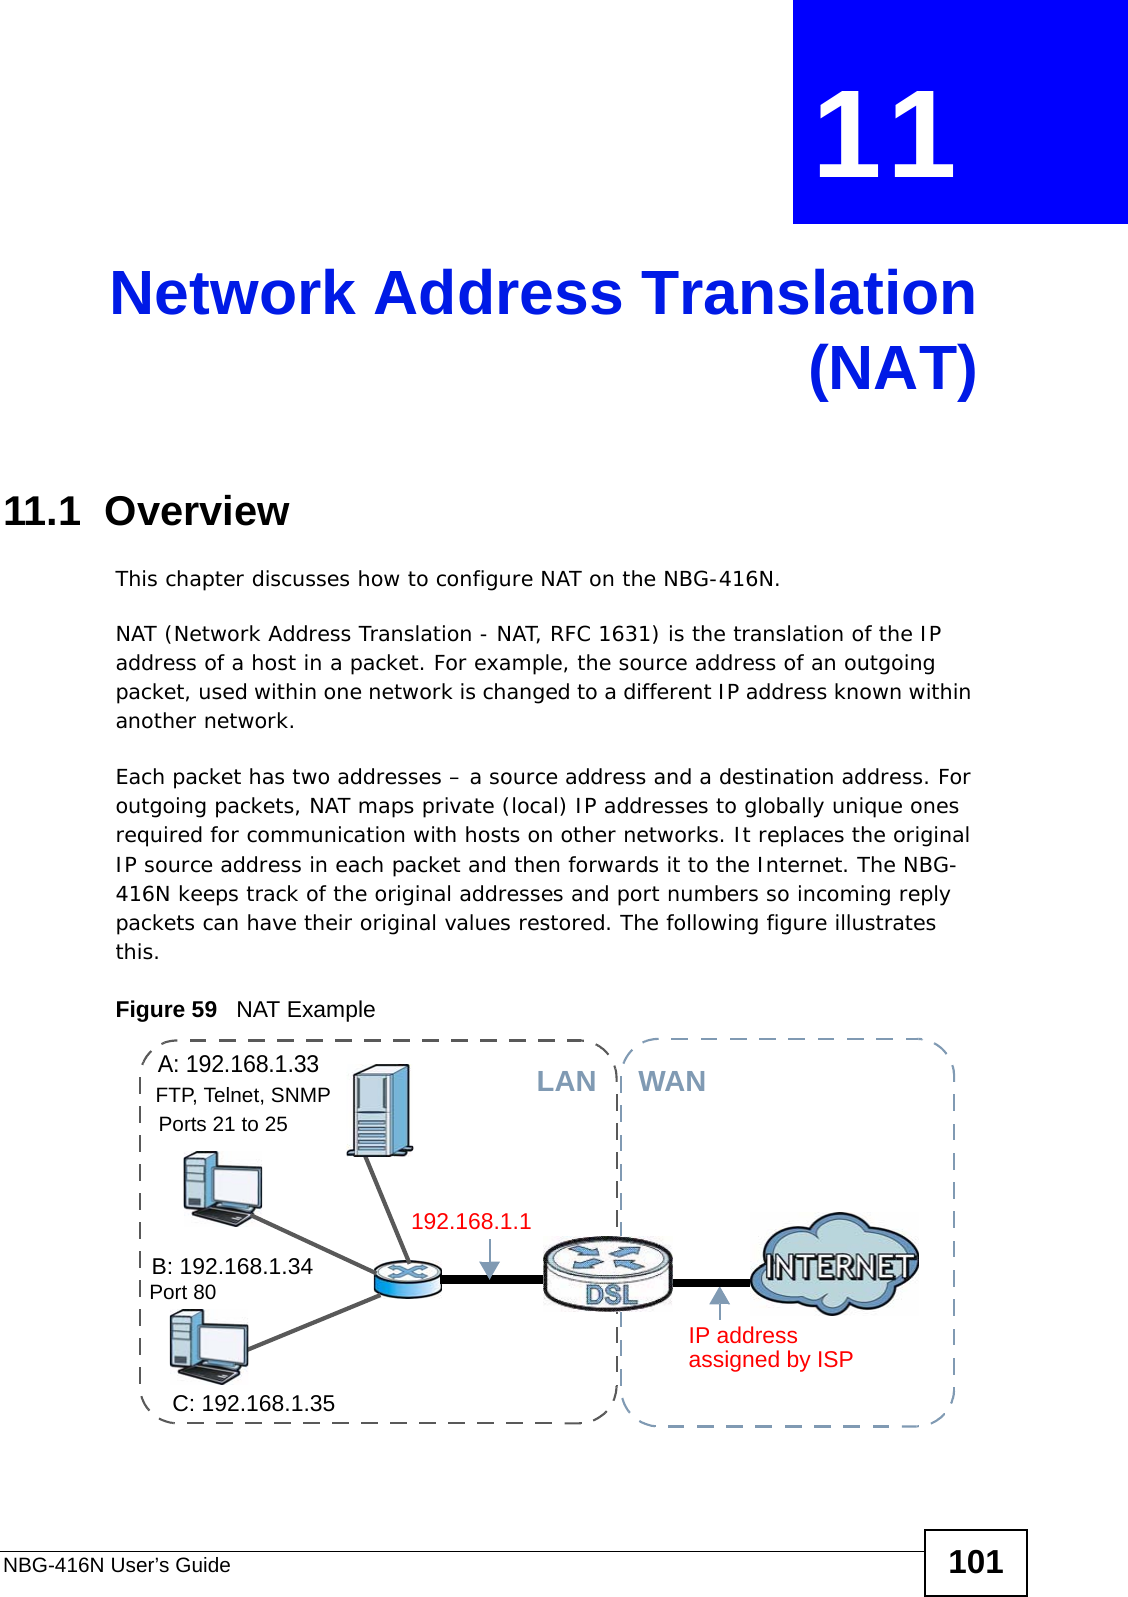 NBG-416N User’s Guide 101CHAPTER  11 Network Address Translation(NAT)11.1  Overview   This chapter discusses how to configure NAT on the NBG-416N.NAT (Network Address Translation - NAT, RFC 1631) is the translation of the IP address of a host in a packet. For example, the source address of an outgoing packet, used within one network is changed to a different IP address known within another network.Each packet has two addresses – a source address and a destination address. For outgoing packets, NAT maps private (local) IP addresses to globally unique ones required for communication with hosts on other networks. It replaces the original IP source address in each packet and then forwards it to the Internet. The NBG-416N keeps track of the original addresses and port numbers so incoming reply packets can have their original values restored. The following figure illustrates this.Figure 59   NAT ExampleA: 192.168.1.33B: 192.168.1.34C: 192.168.1.35IP address 192.168.1.1WANLANassigned by ISPFTP, Telnet, SNMPPort 80Ports 21 to 25